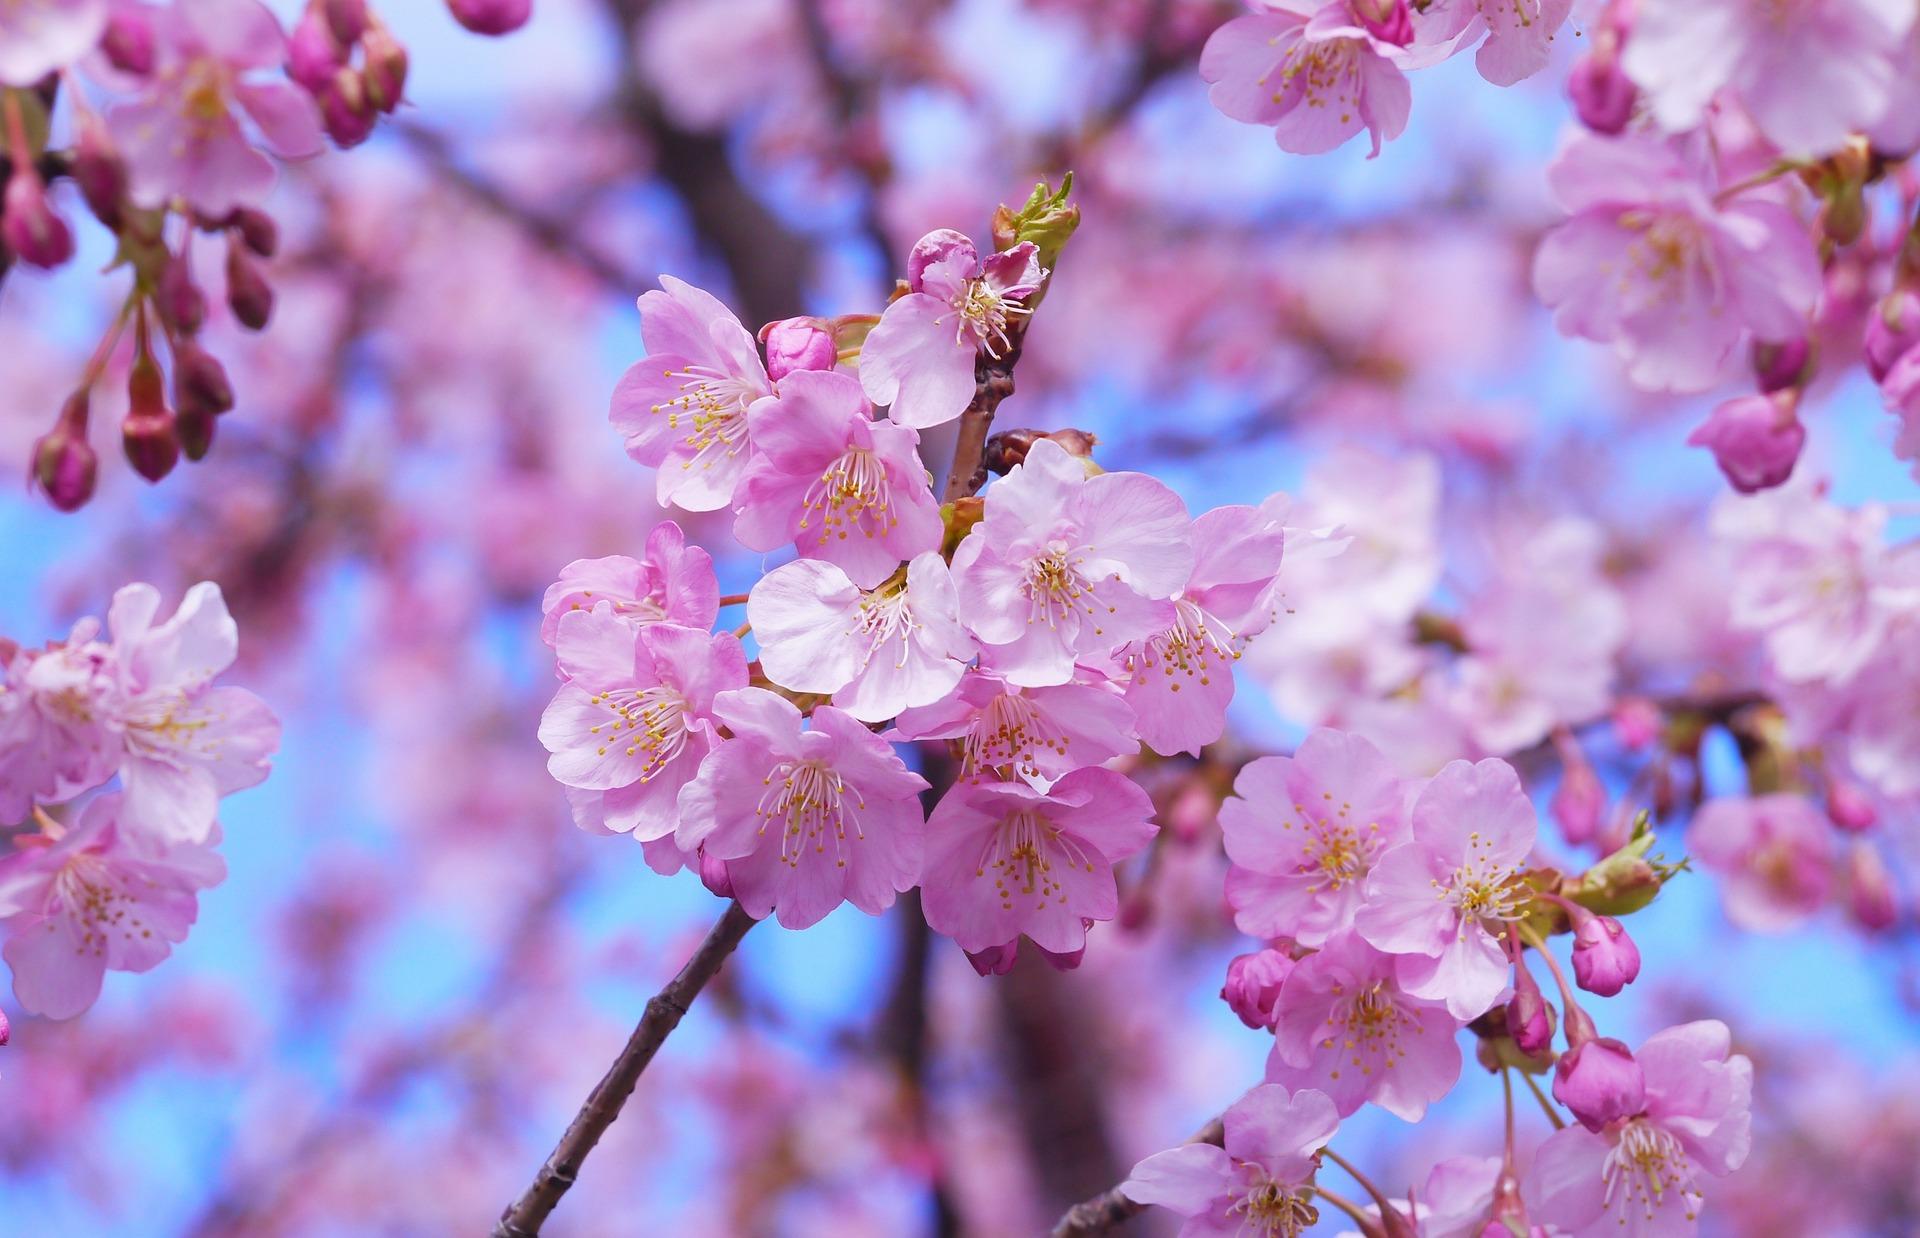 uploads/images/Cherry Blossoms 1317308_1920